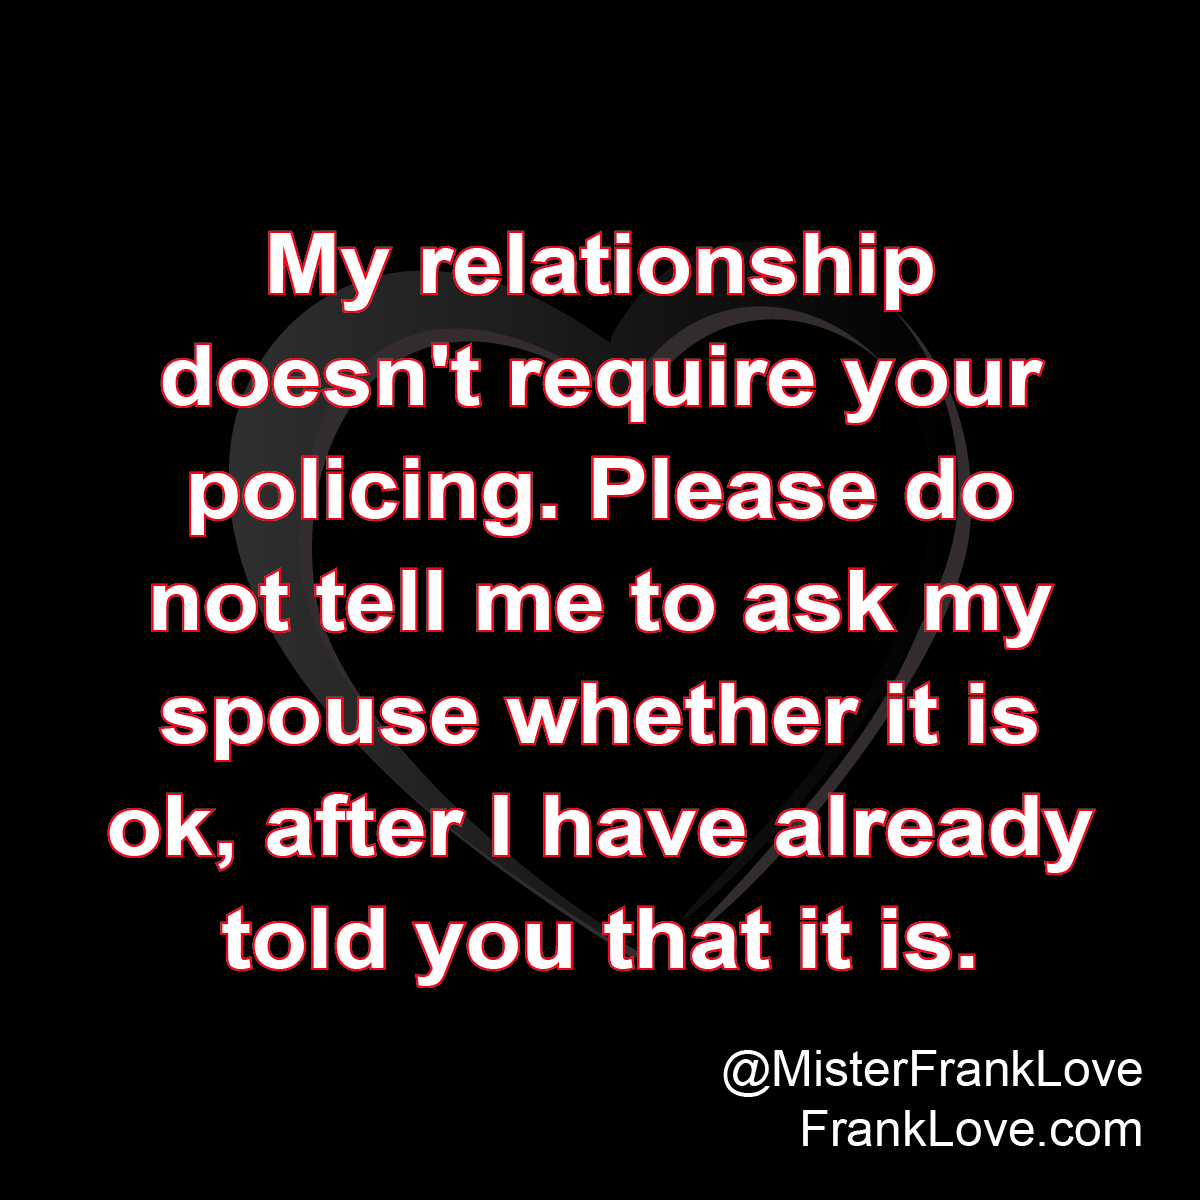 “Did You Ask Your Wife?” (Part 1) - Frank Love on Relationships